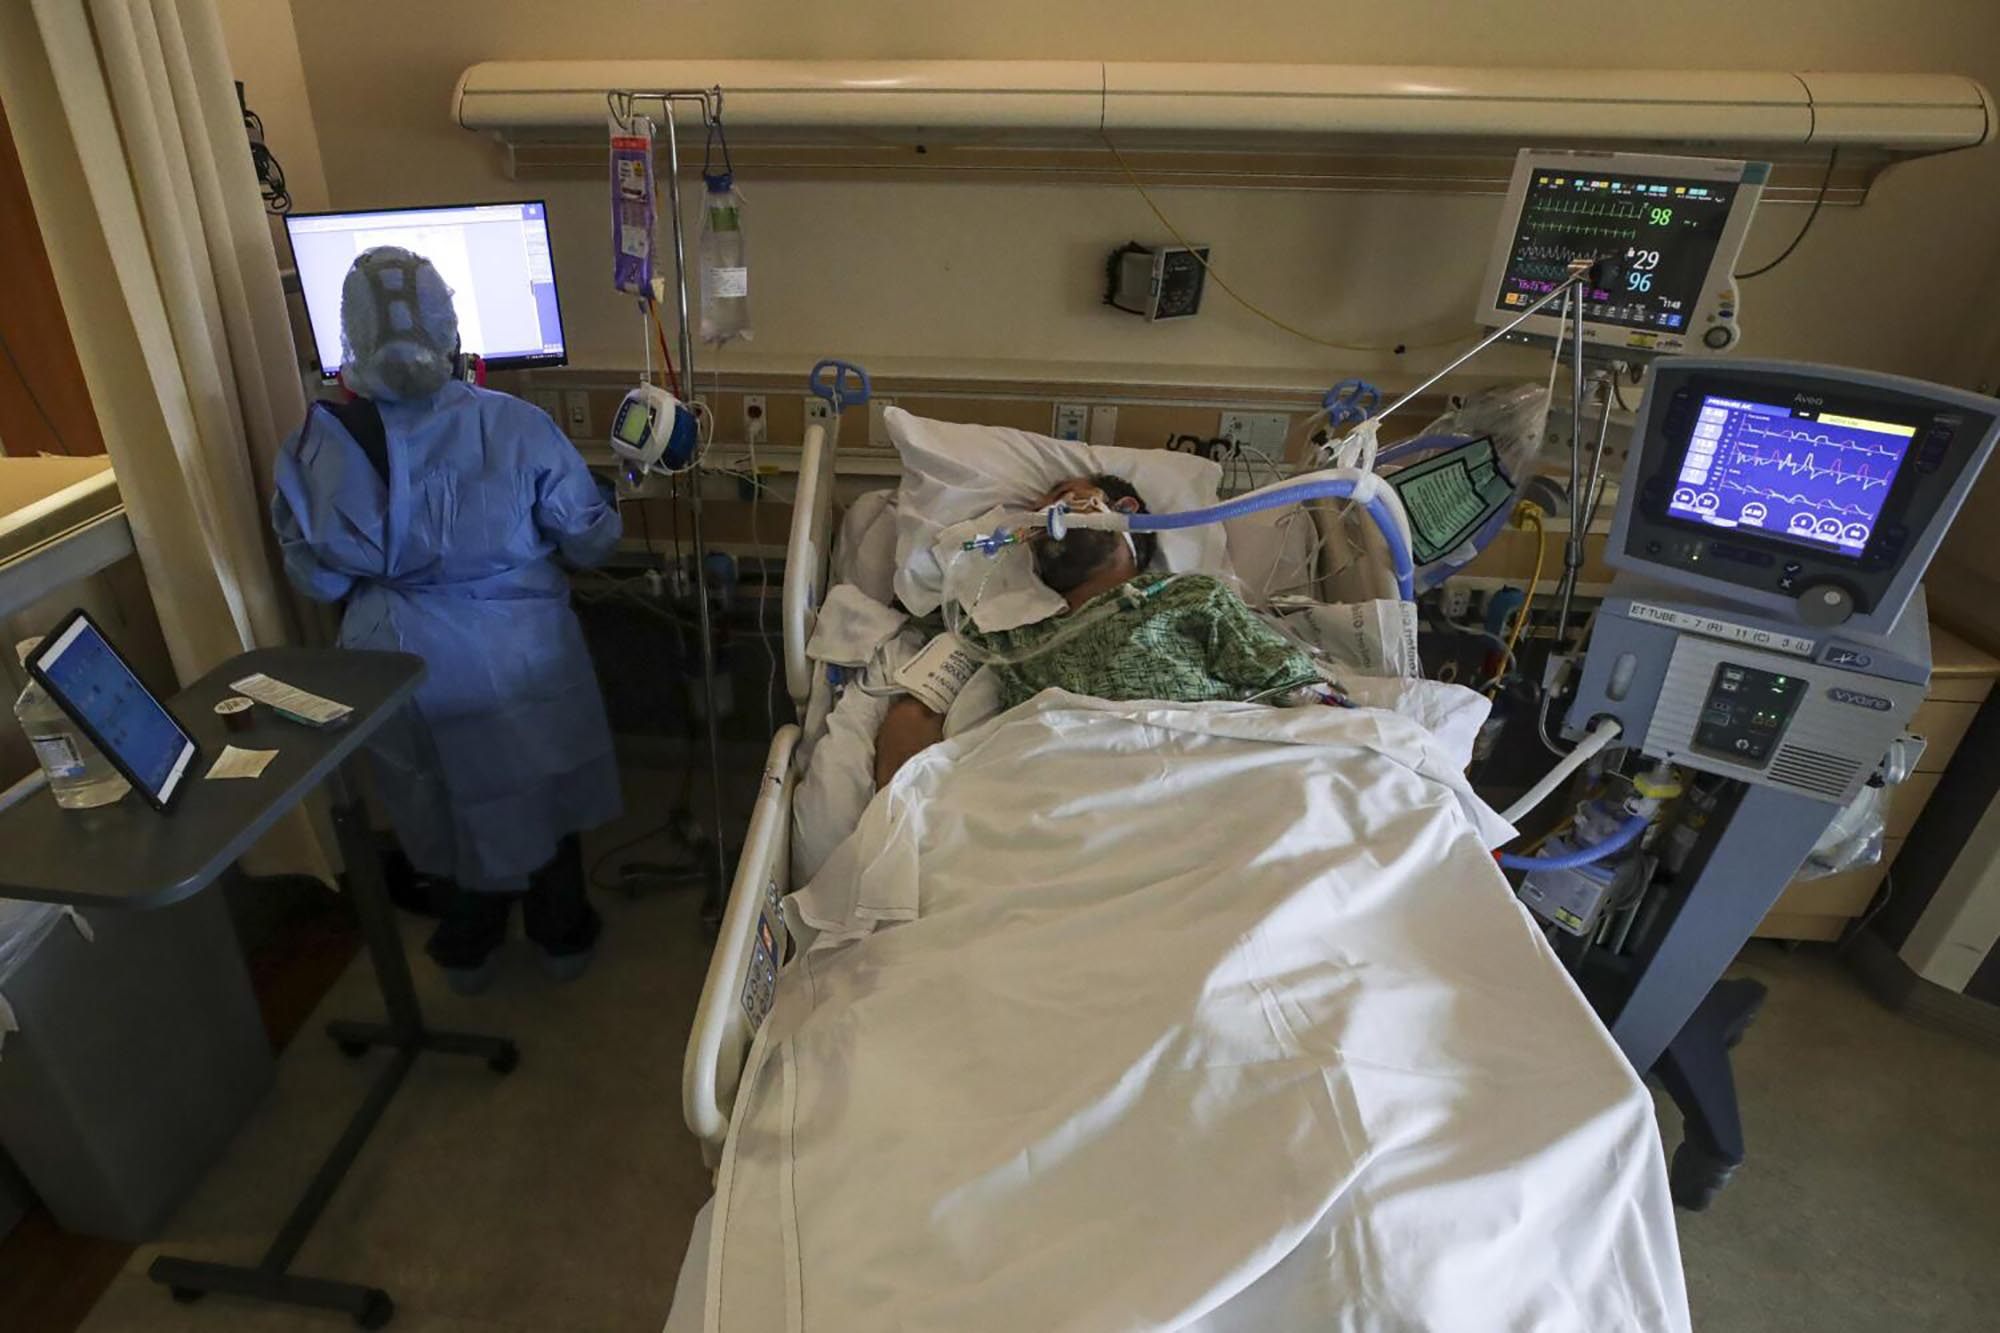 A hospital worker attends to a Covid-19 patient at St Jude Medical Centre in Fullerton, California. Photo: TNS